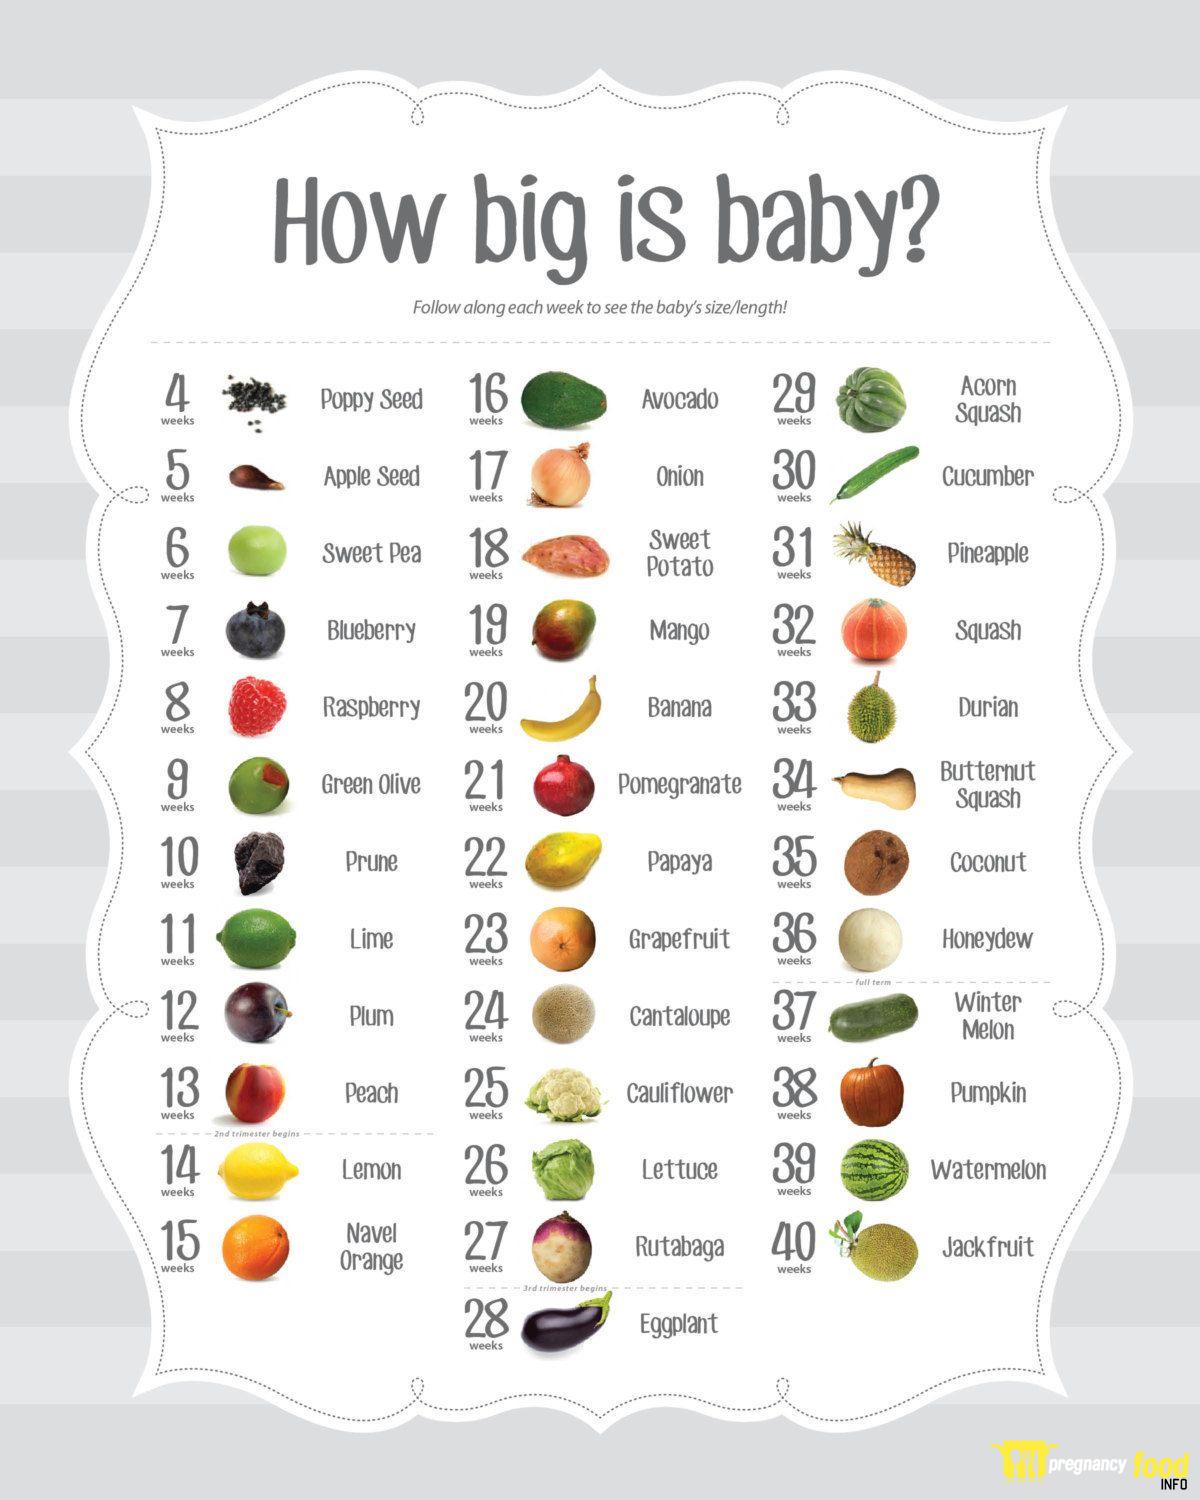 How Big Is a Baby at 3 Months?